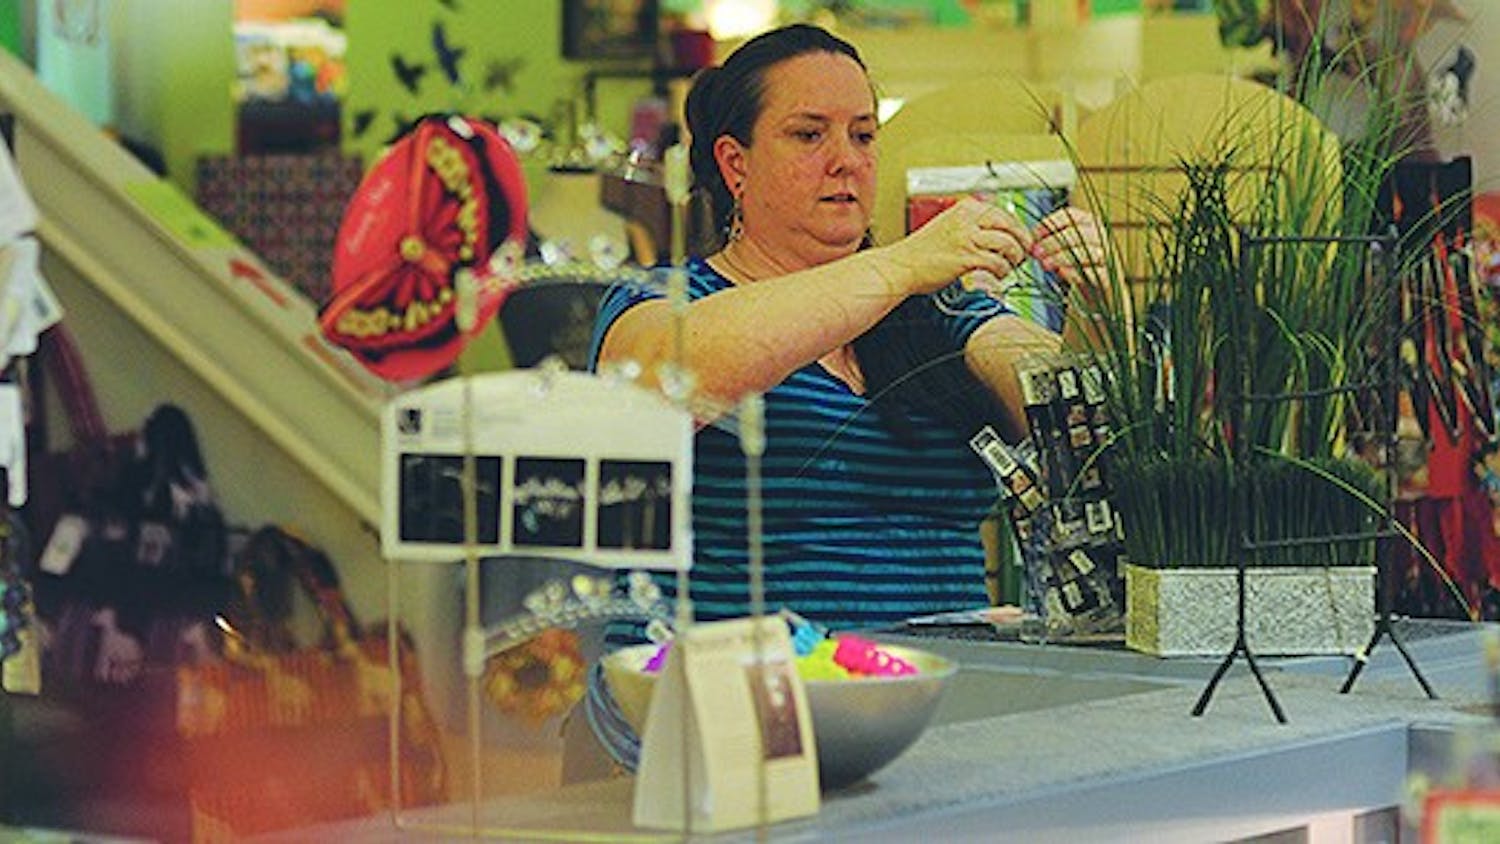 Kara Ikenberry, an employee at Cameron's, rearranges some goods after a long day's work.